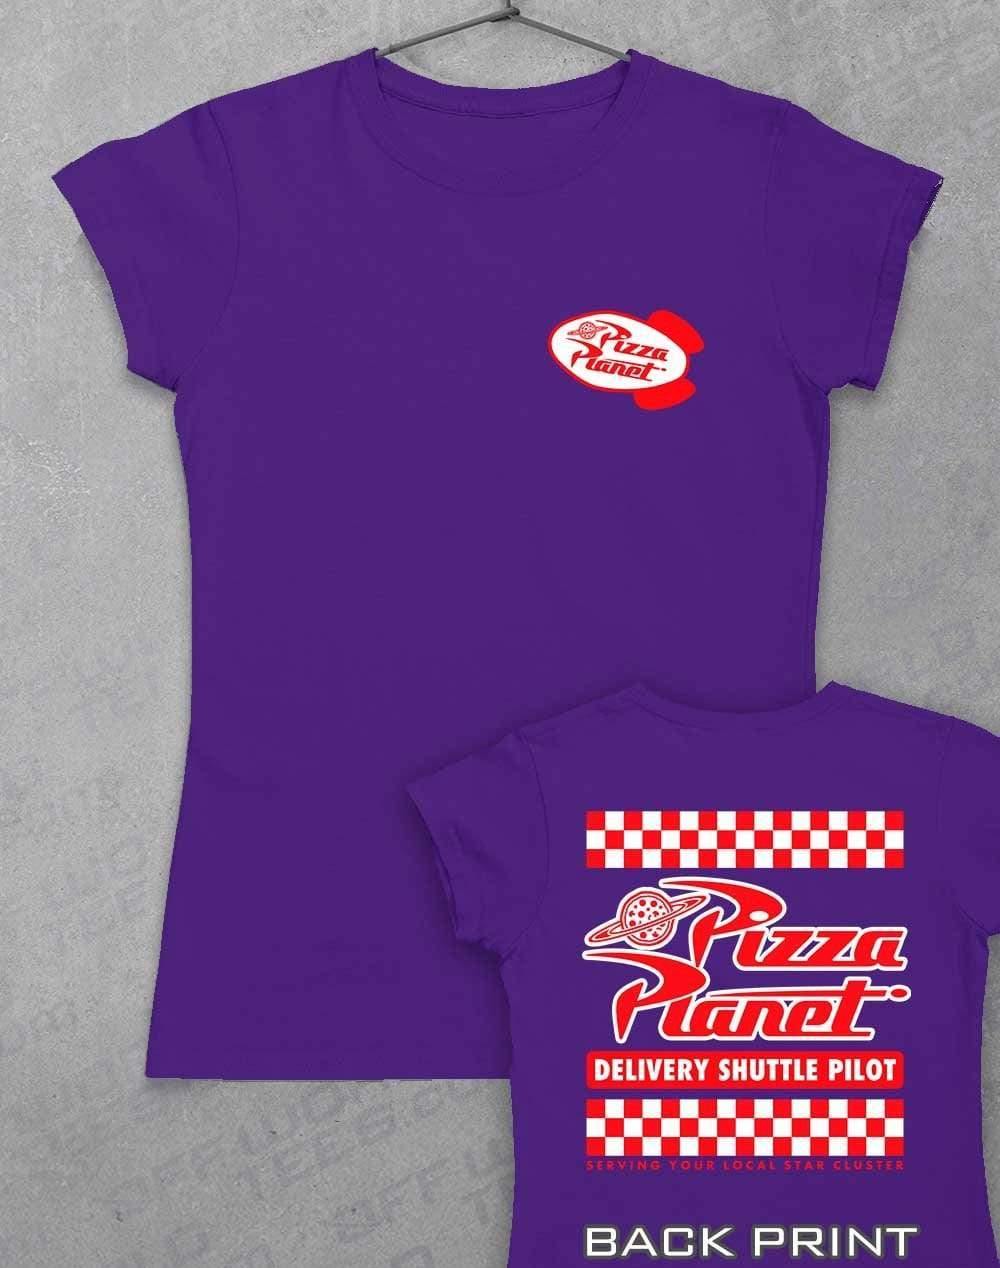 Pizza Planet Shuttle Pilot with Back Print Womens T-Shirt 8-10 / Lilac  - Off World Tees